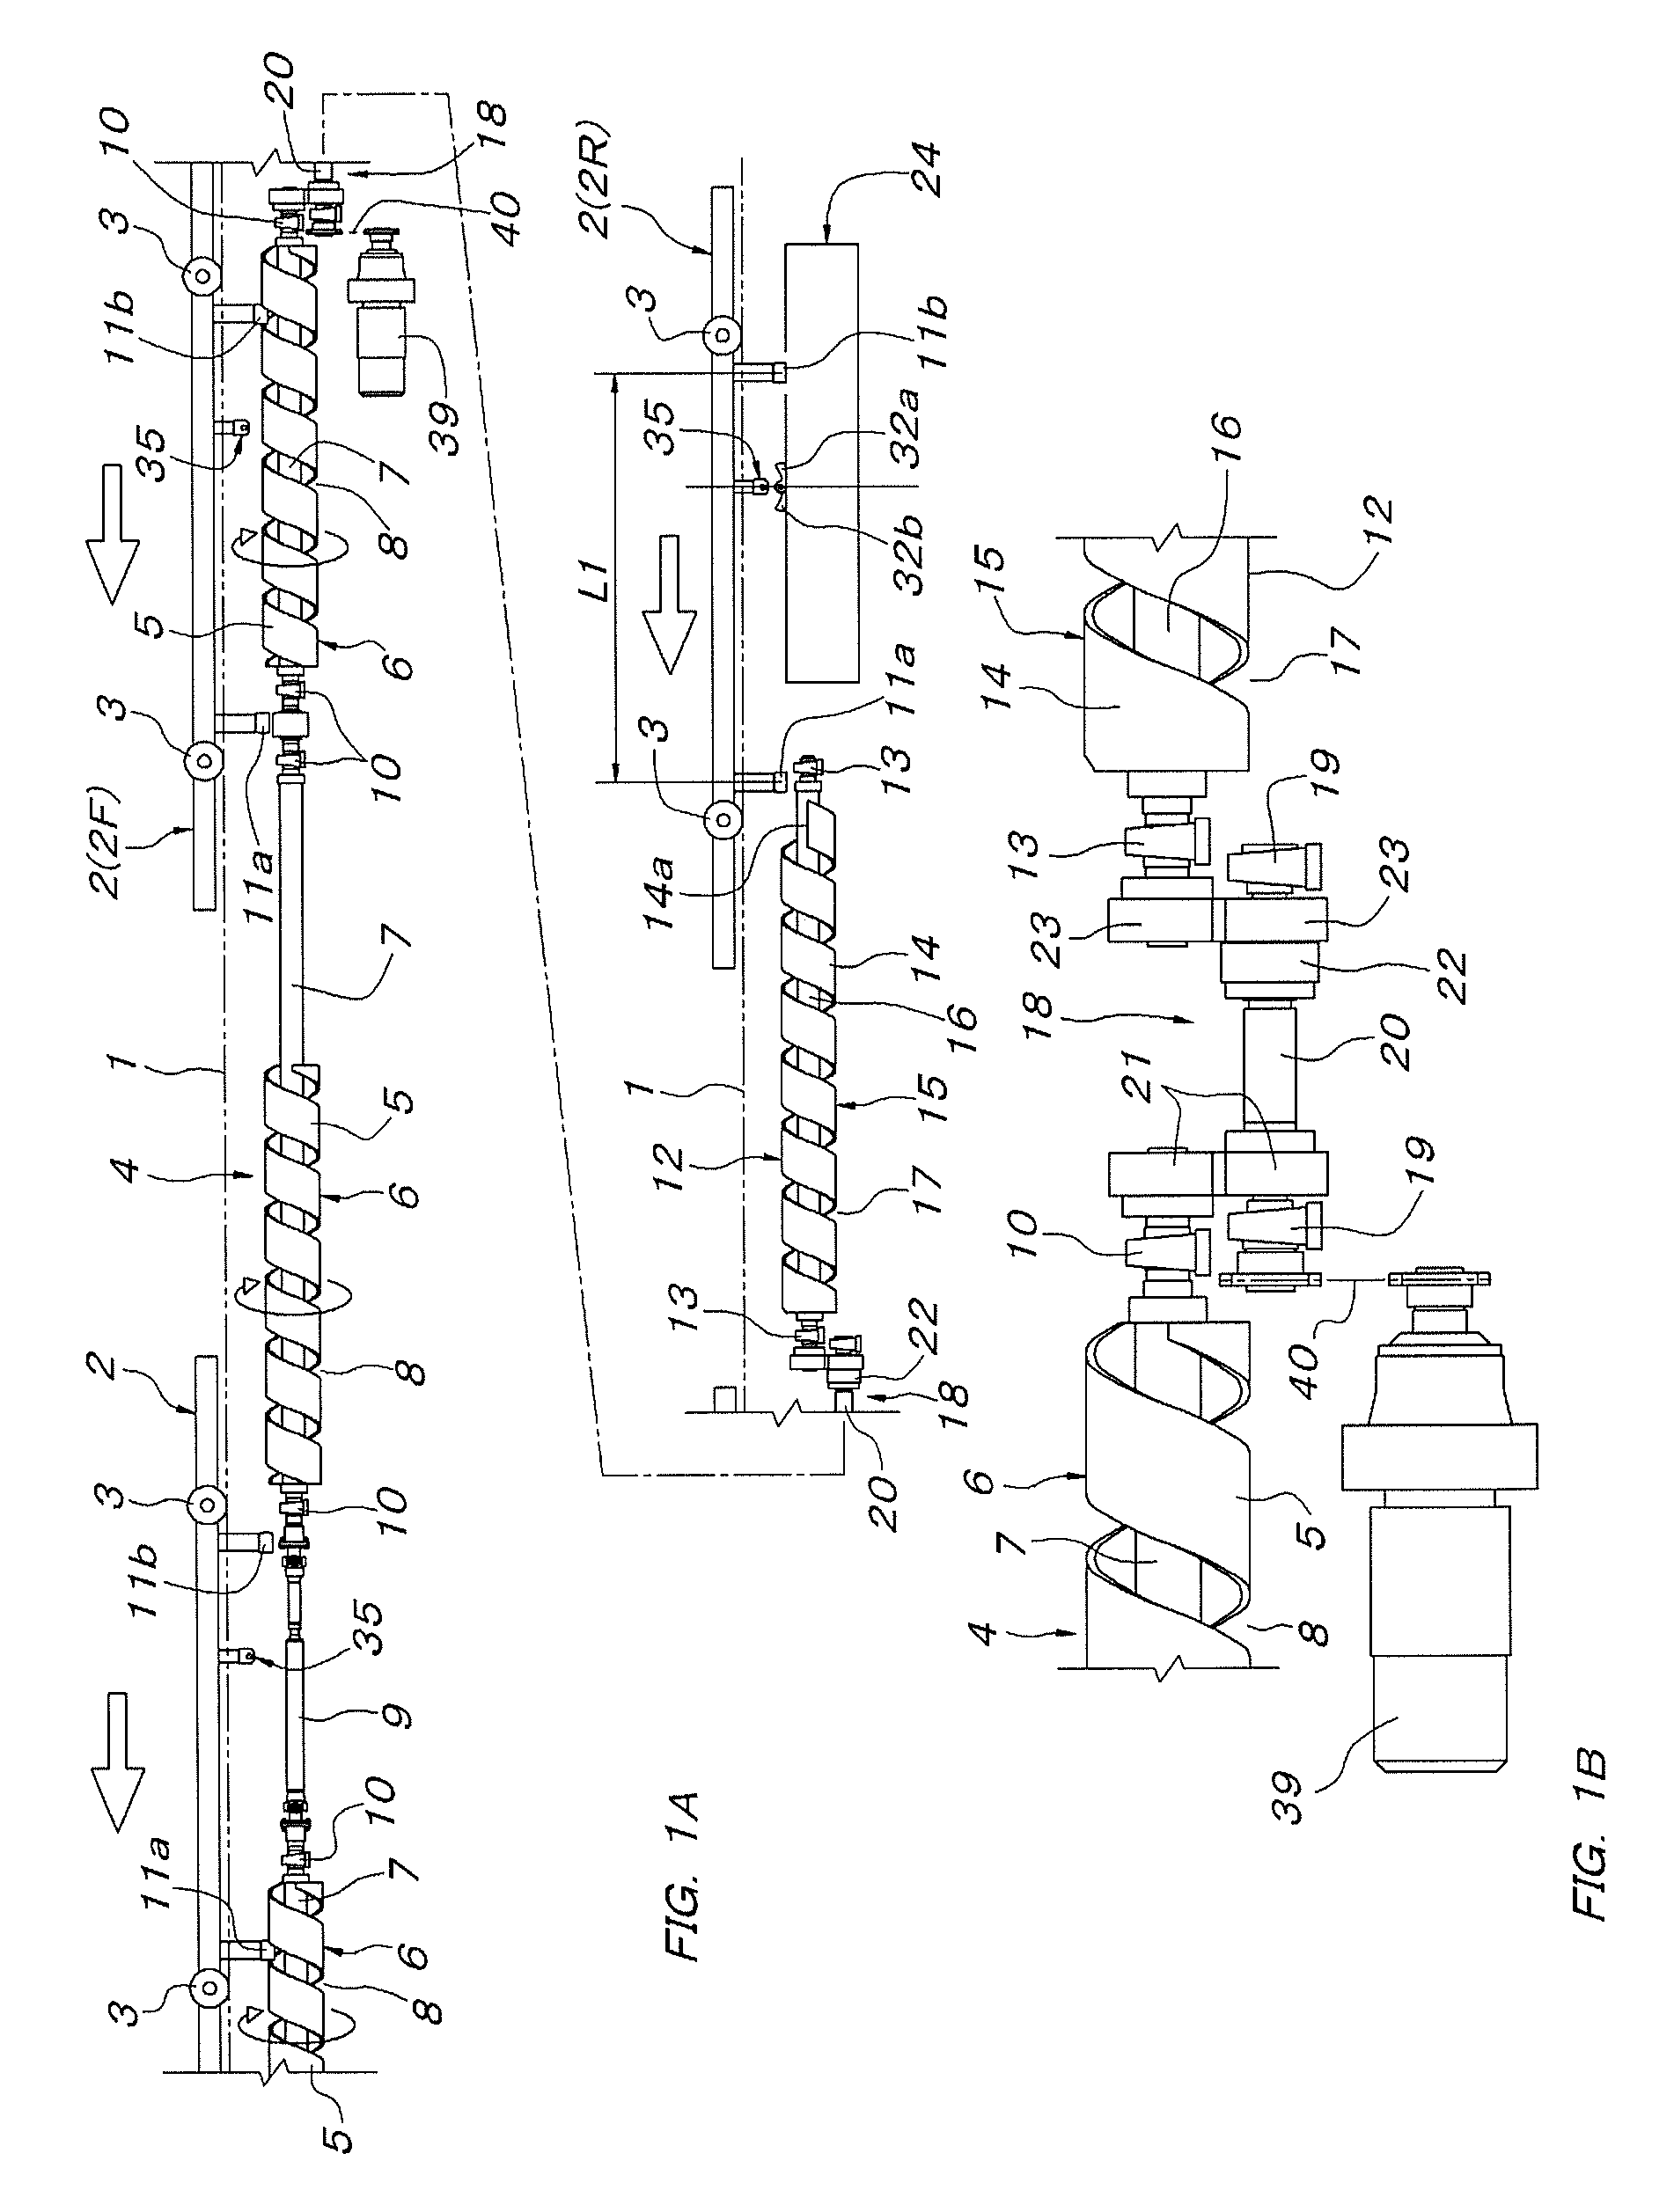 Device for delivering conveying truck into screw driving area